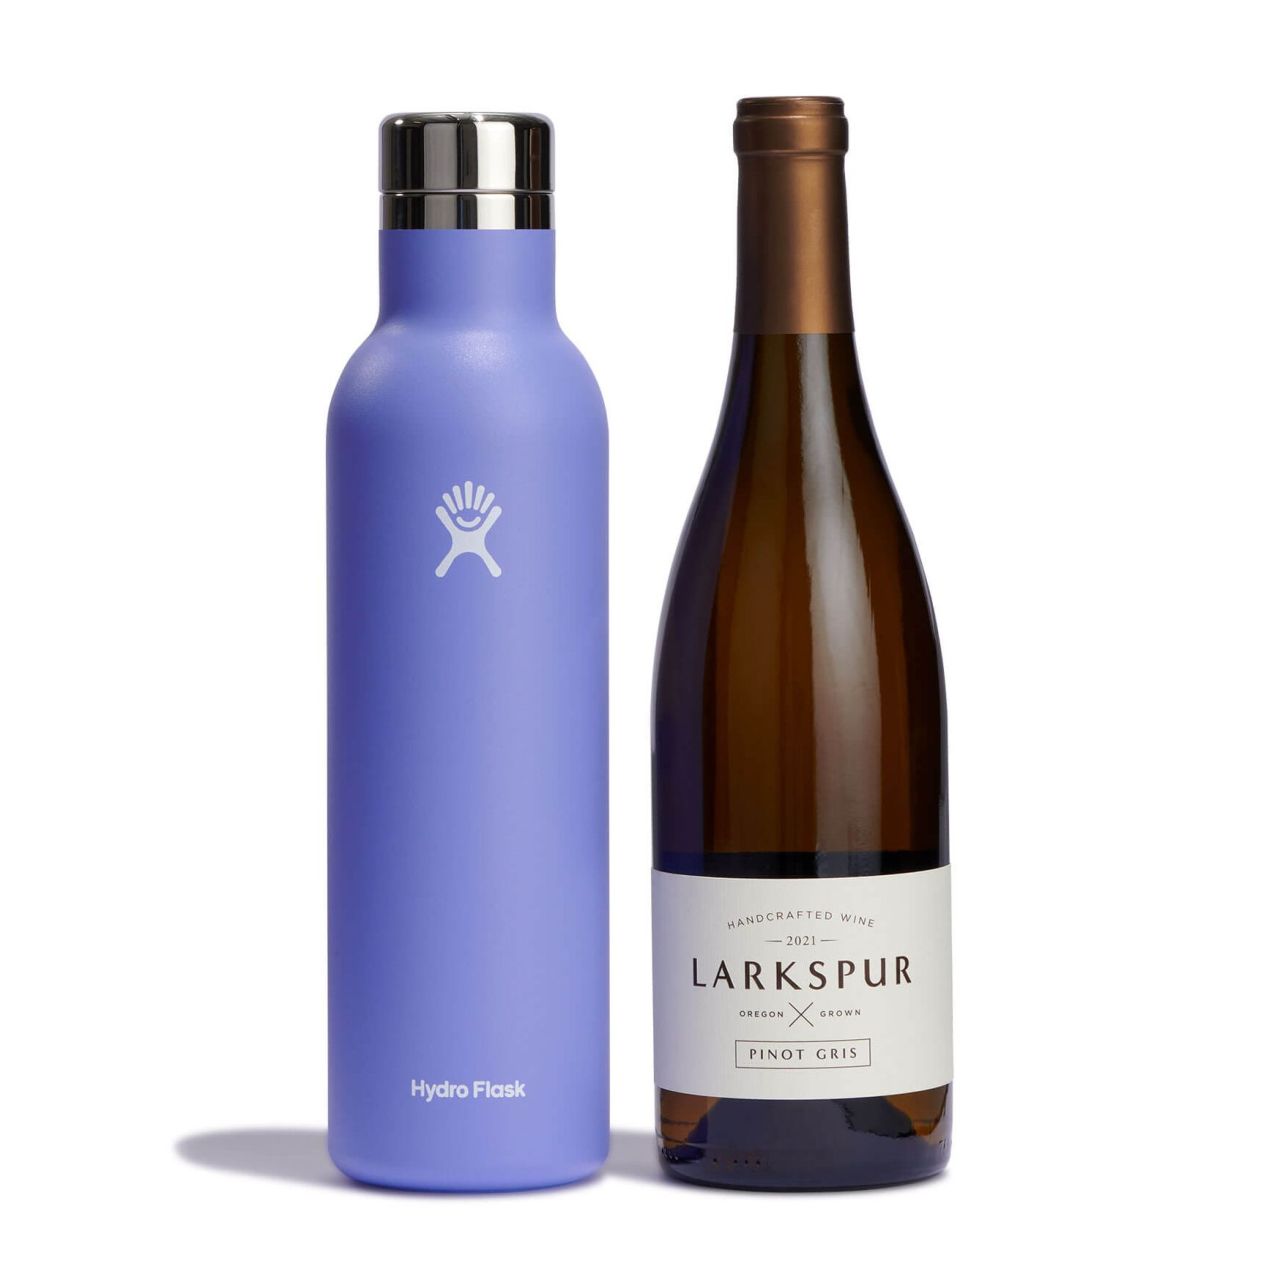  Hydro Flask Wine Tumbler & Bottle - Insulated Alcohol